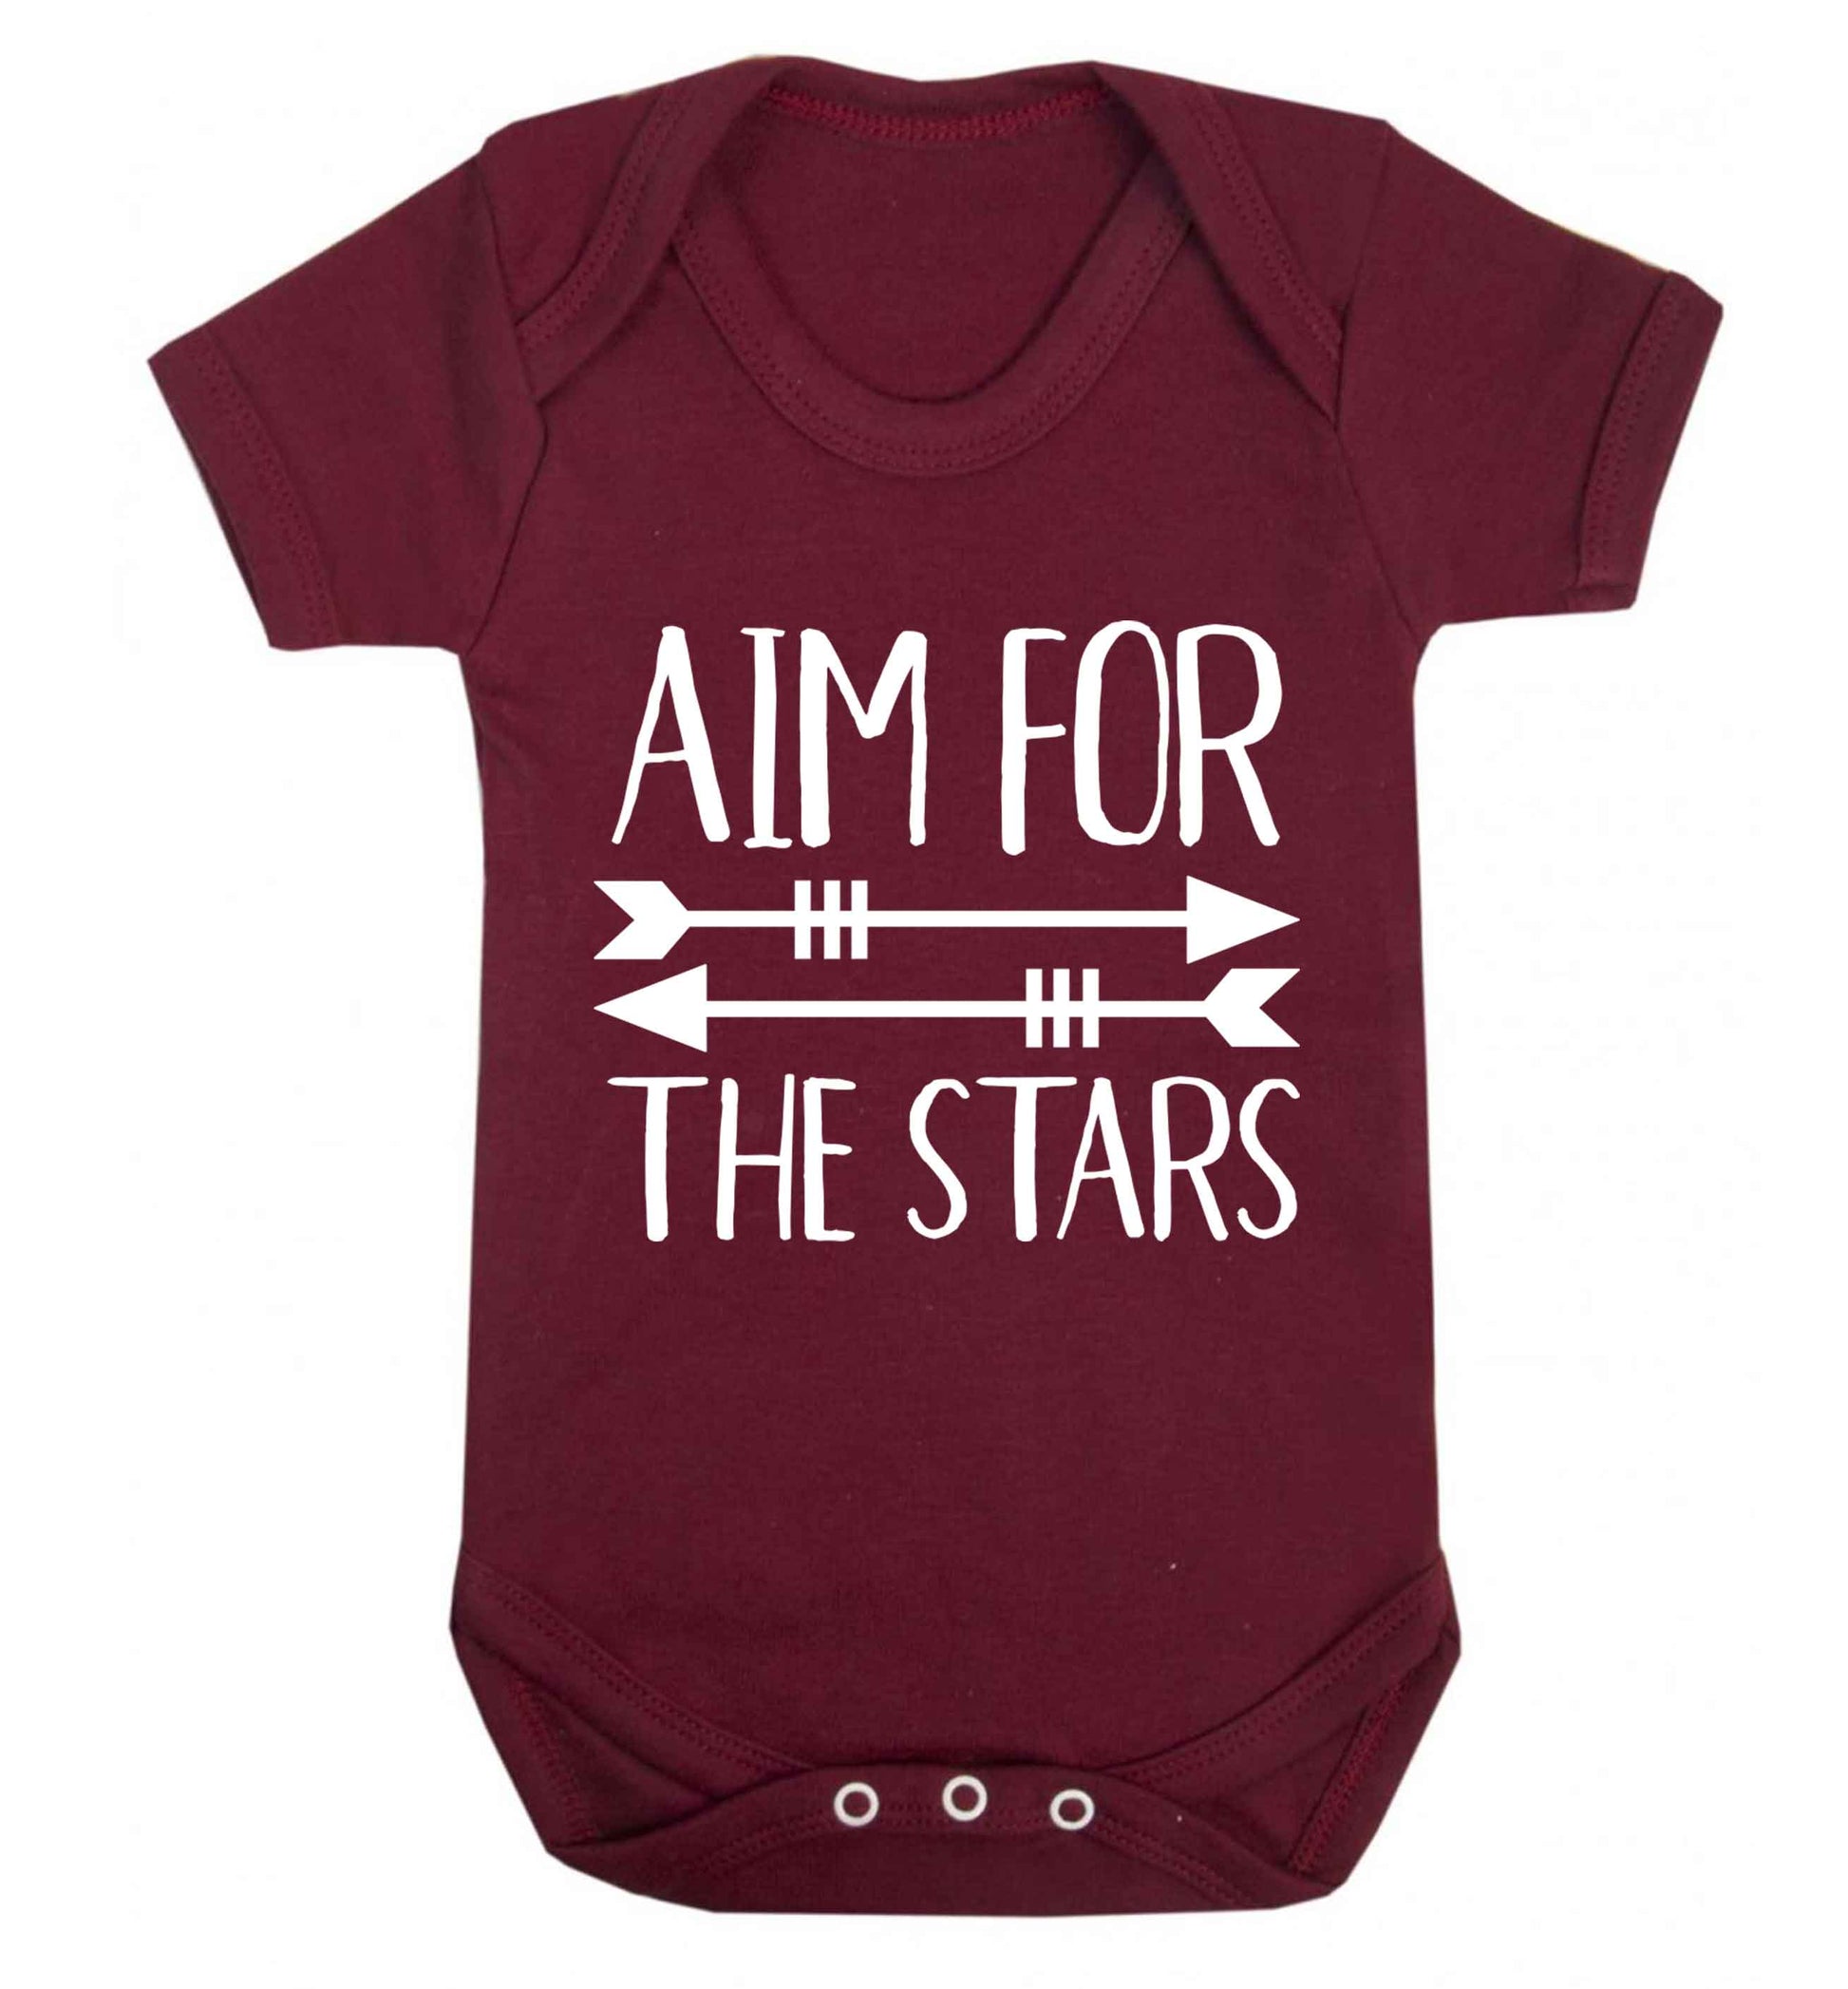 Aim for the stars Baby Vest maroon 18-24 months